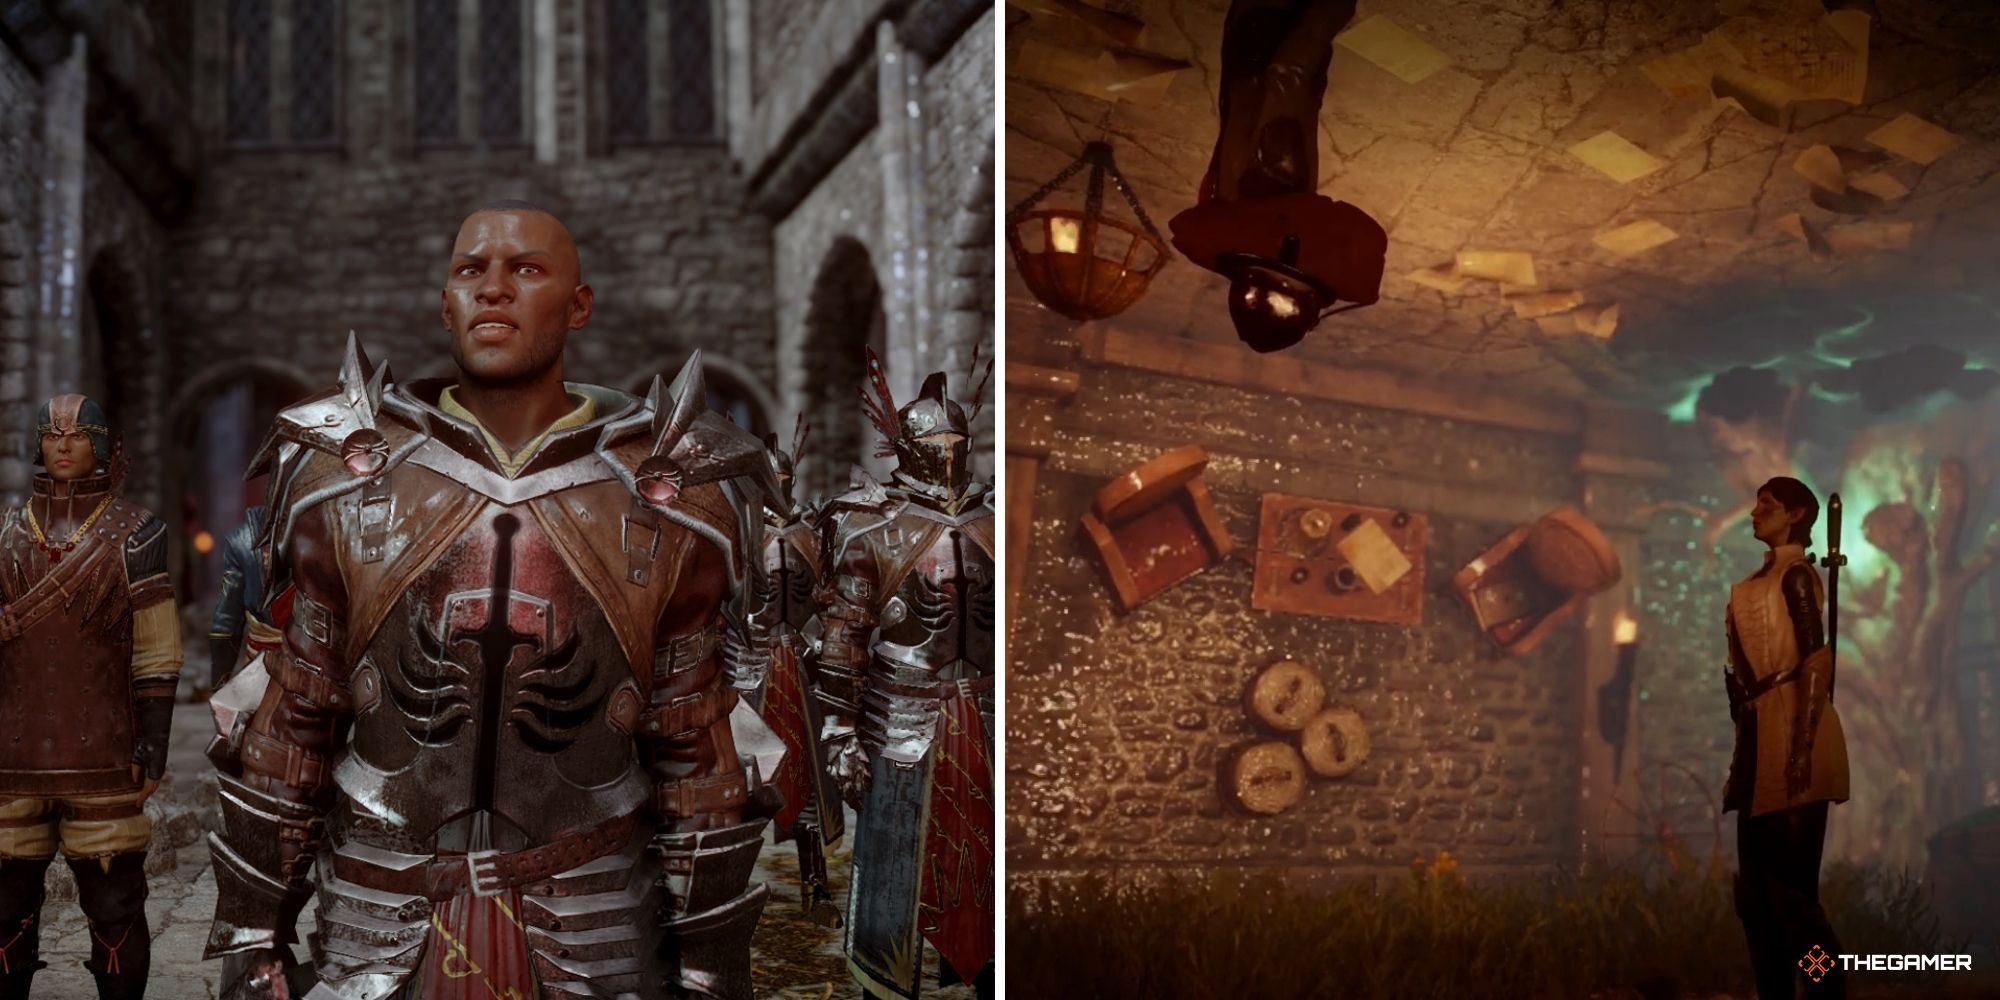 Dragon Age Inquisition - Barris and friendly Templars on left, Cole and player on right